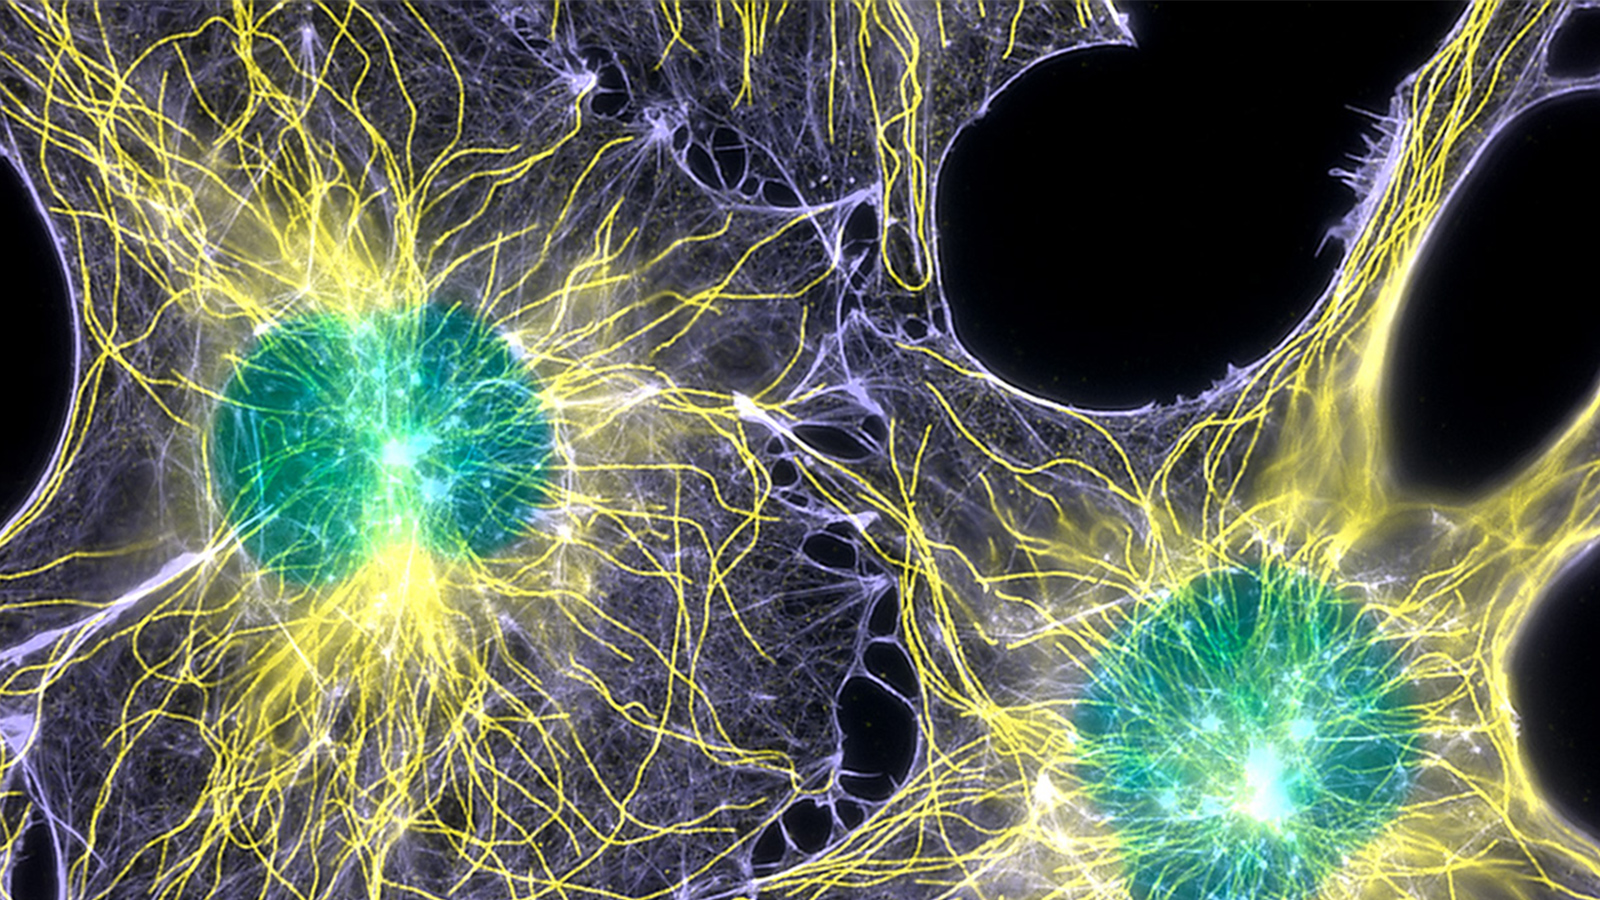 Actin-microtubules-and-nuclei-labeled-in-cells